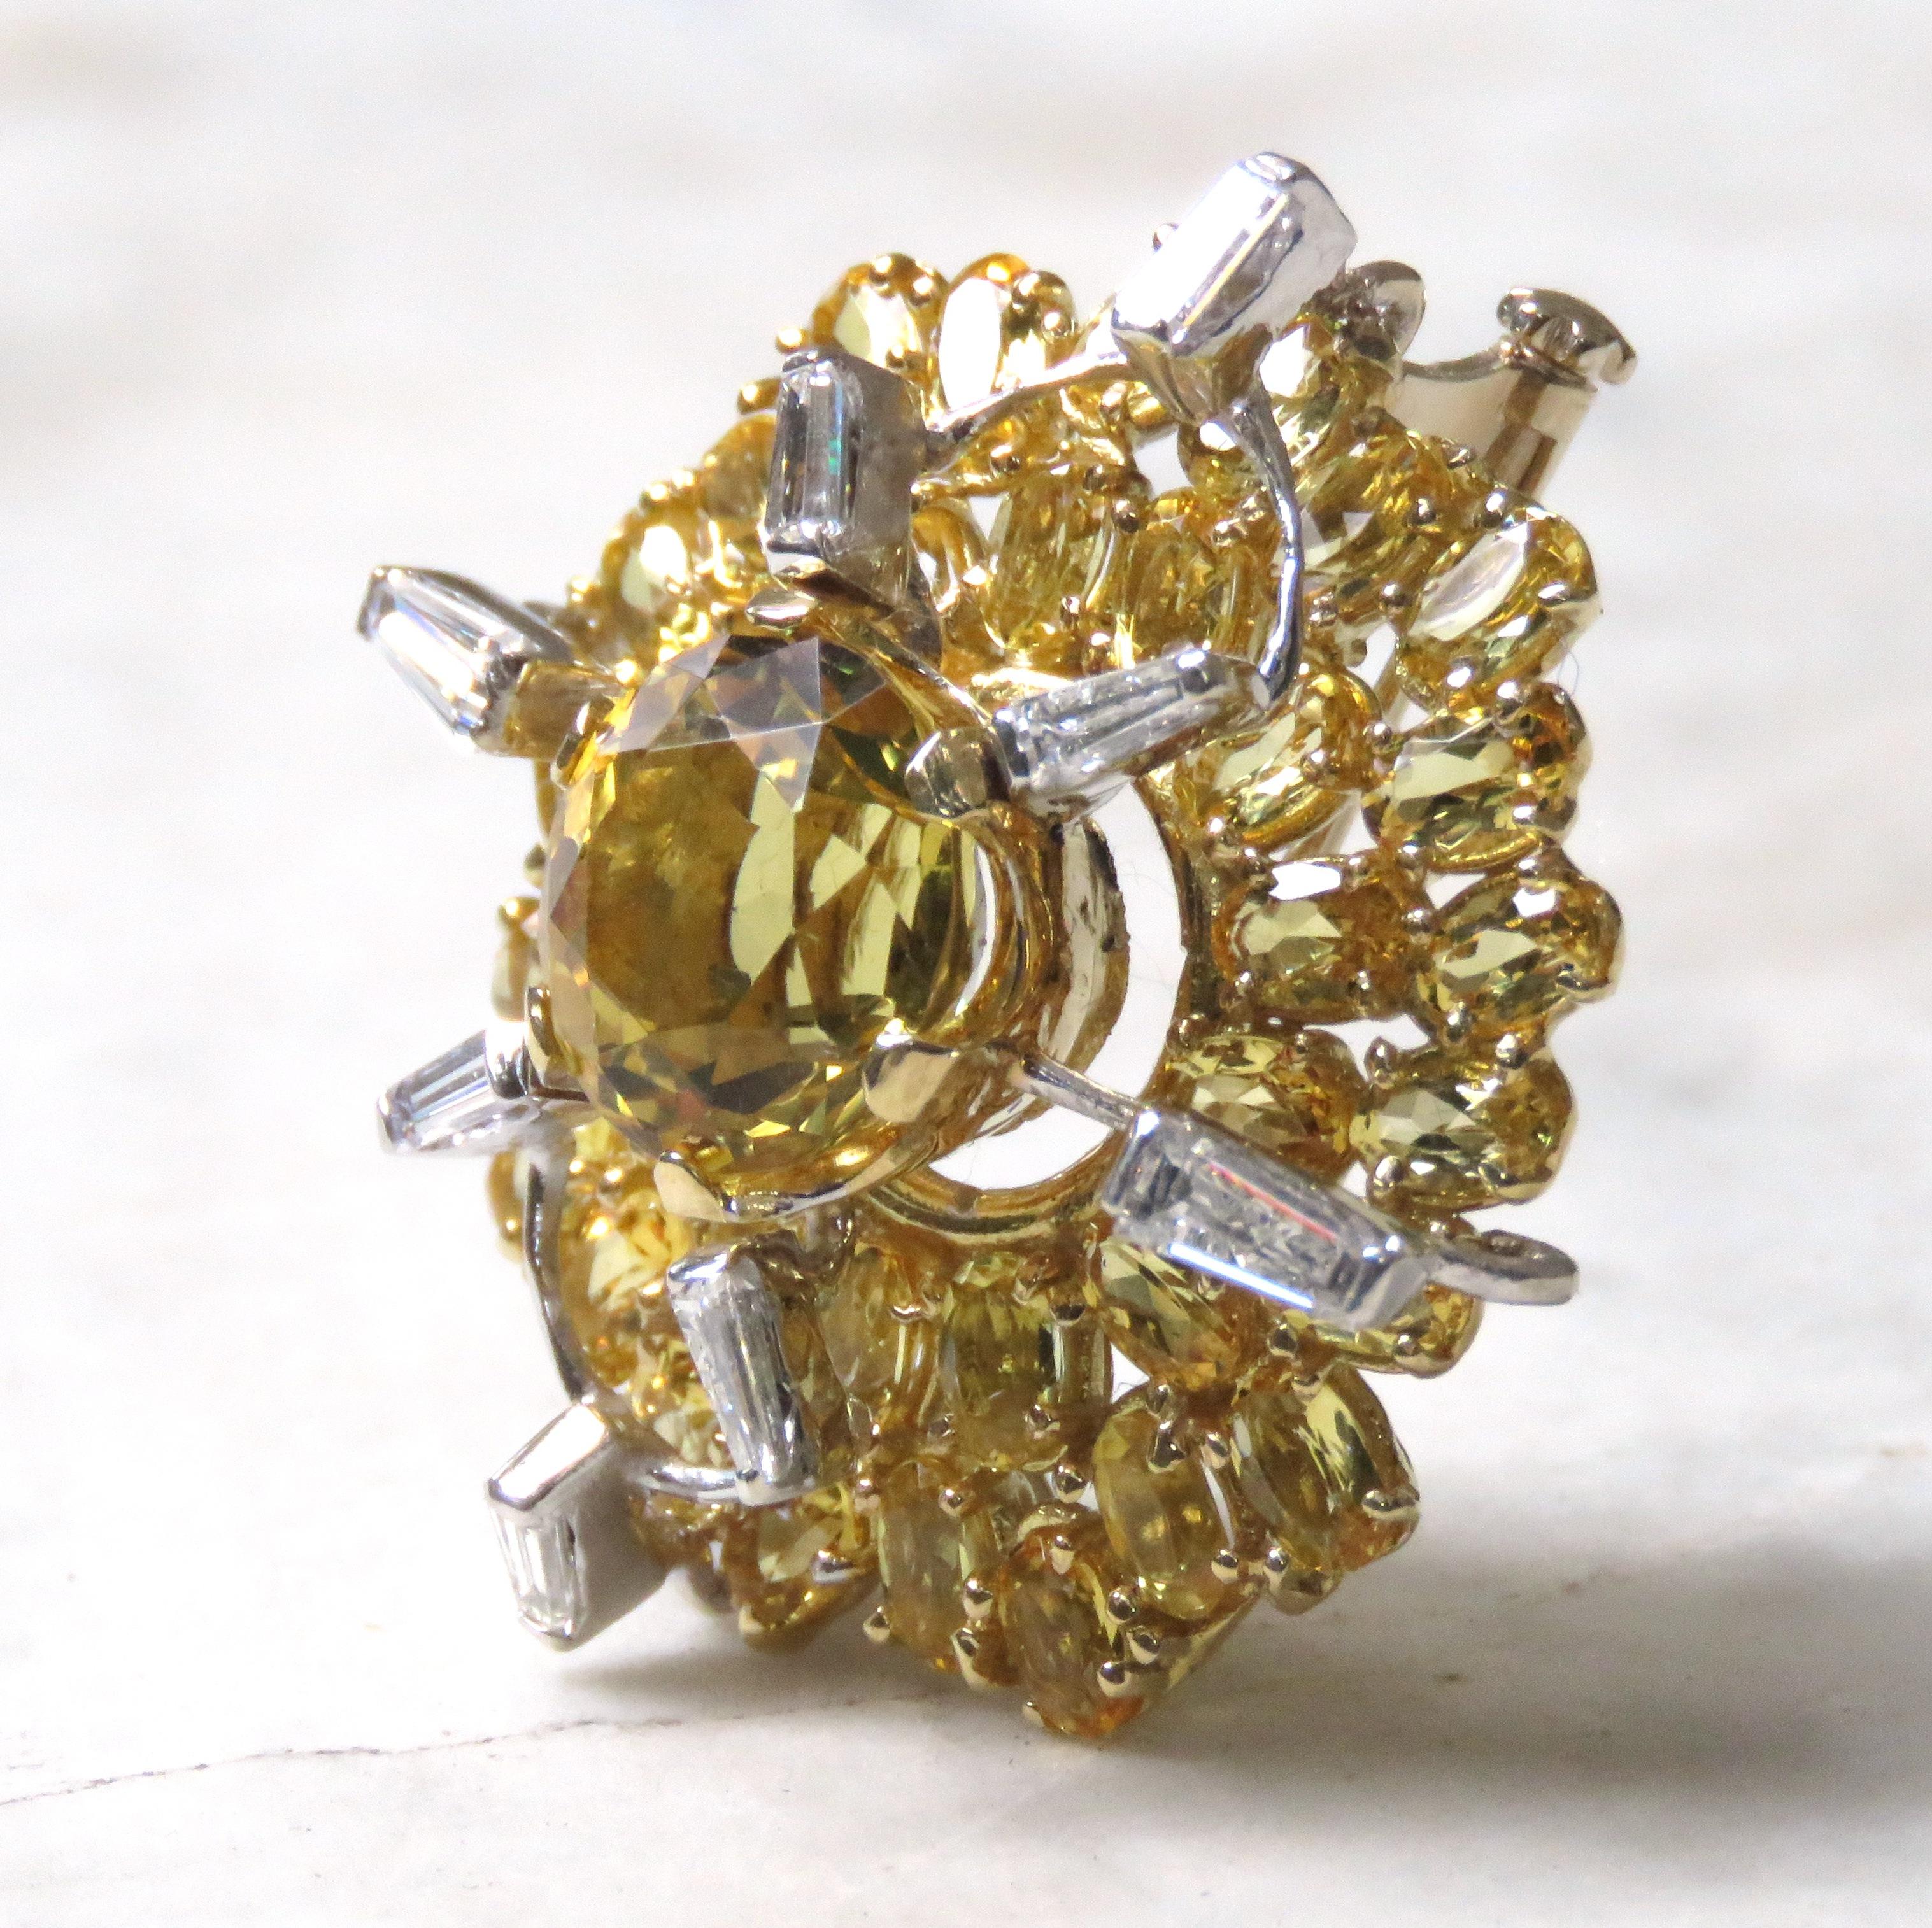 Extraordinary white and yellow gold 18k brooch with a central brilliant-cut yellow beril ctw 3.10, 8 trapezoid-cut diamonds ctw 0.80 and yellow beryls ctw 4.25. The brooch is handcrafted in Italy by Botta Gioielli. It  is marked with the Italian